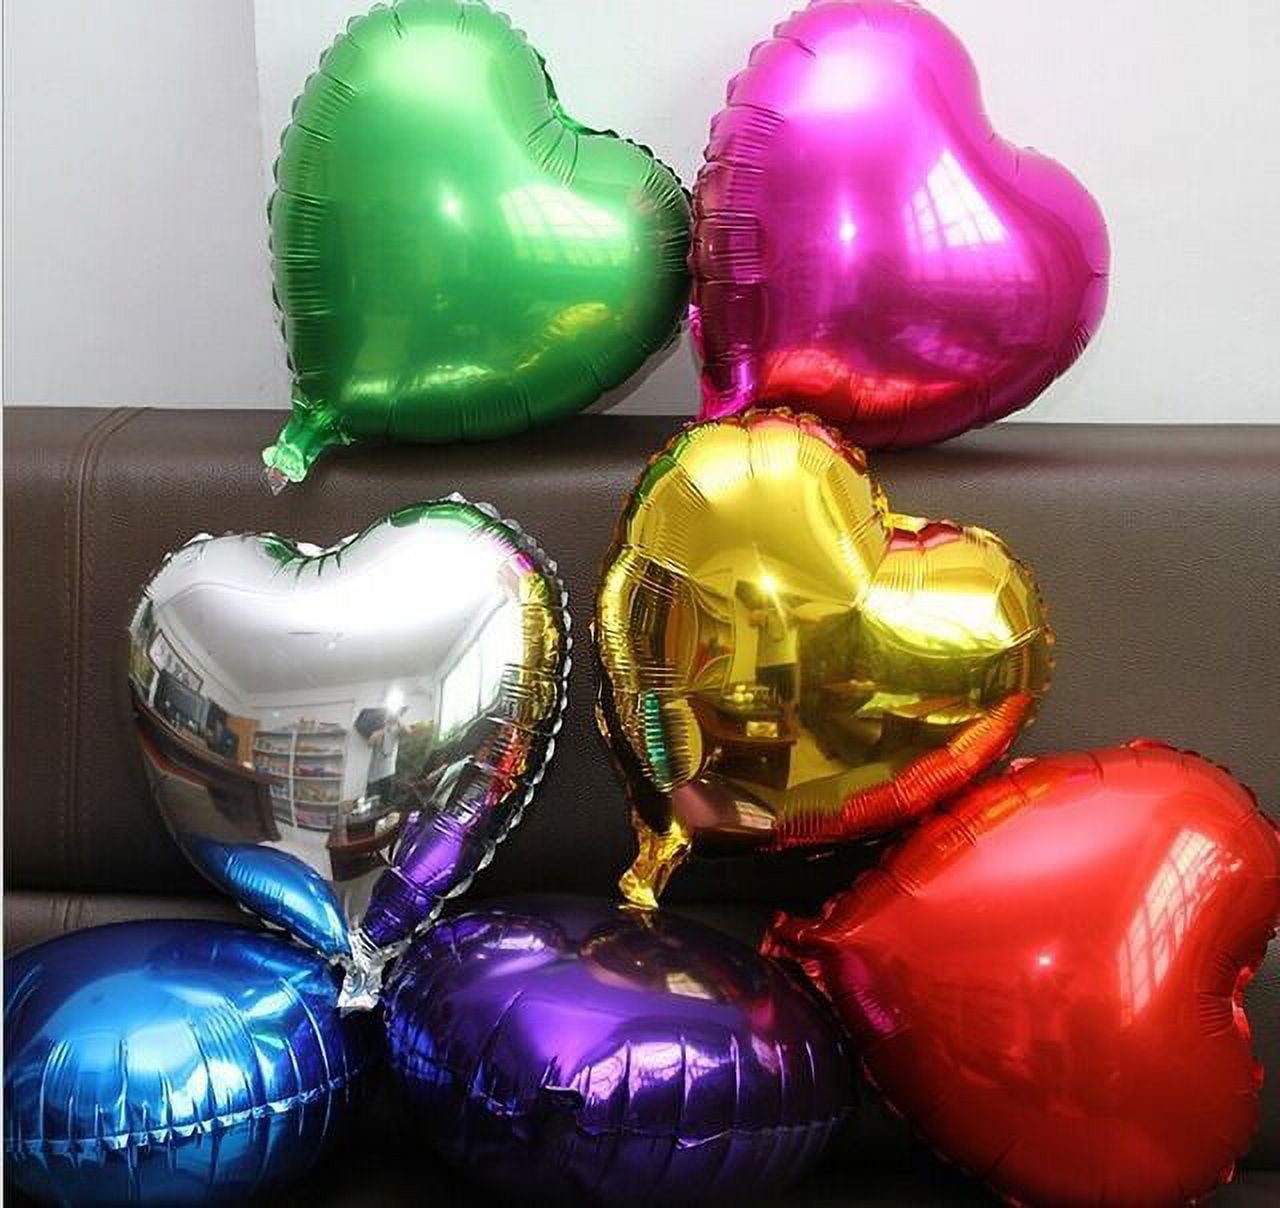 LoveFoil Heart Balloons For Birthday & Weddings Valentines Decorations With  Pearlescent Shine From Xiahuaguo, $16.94